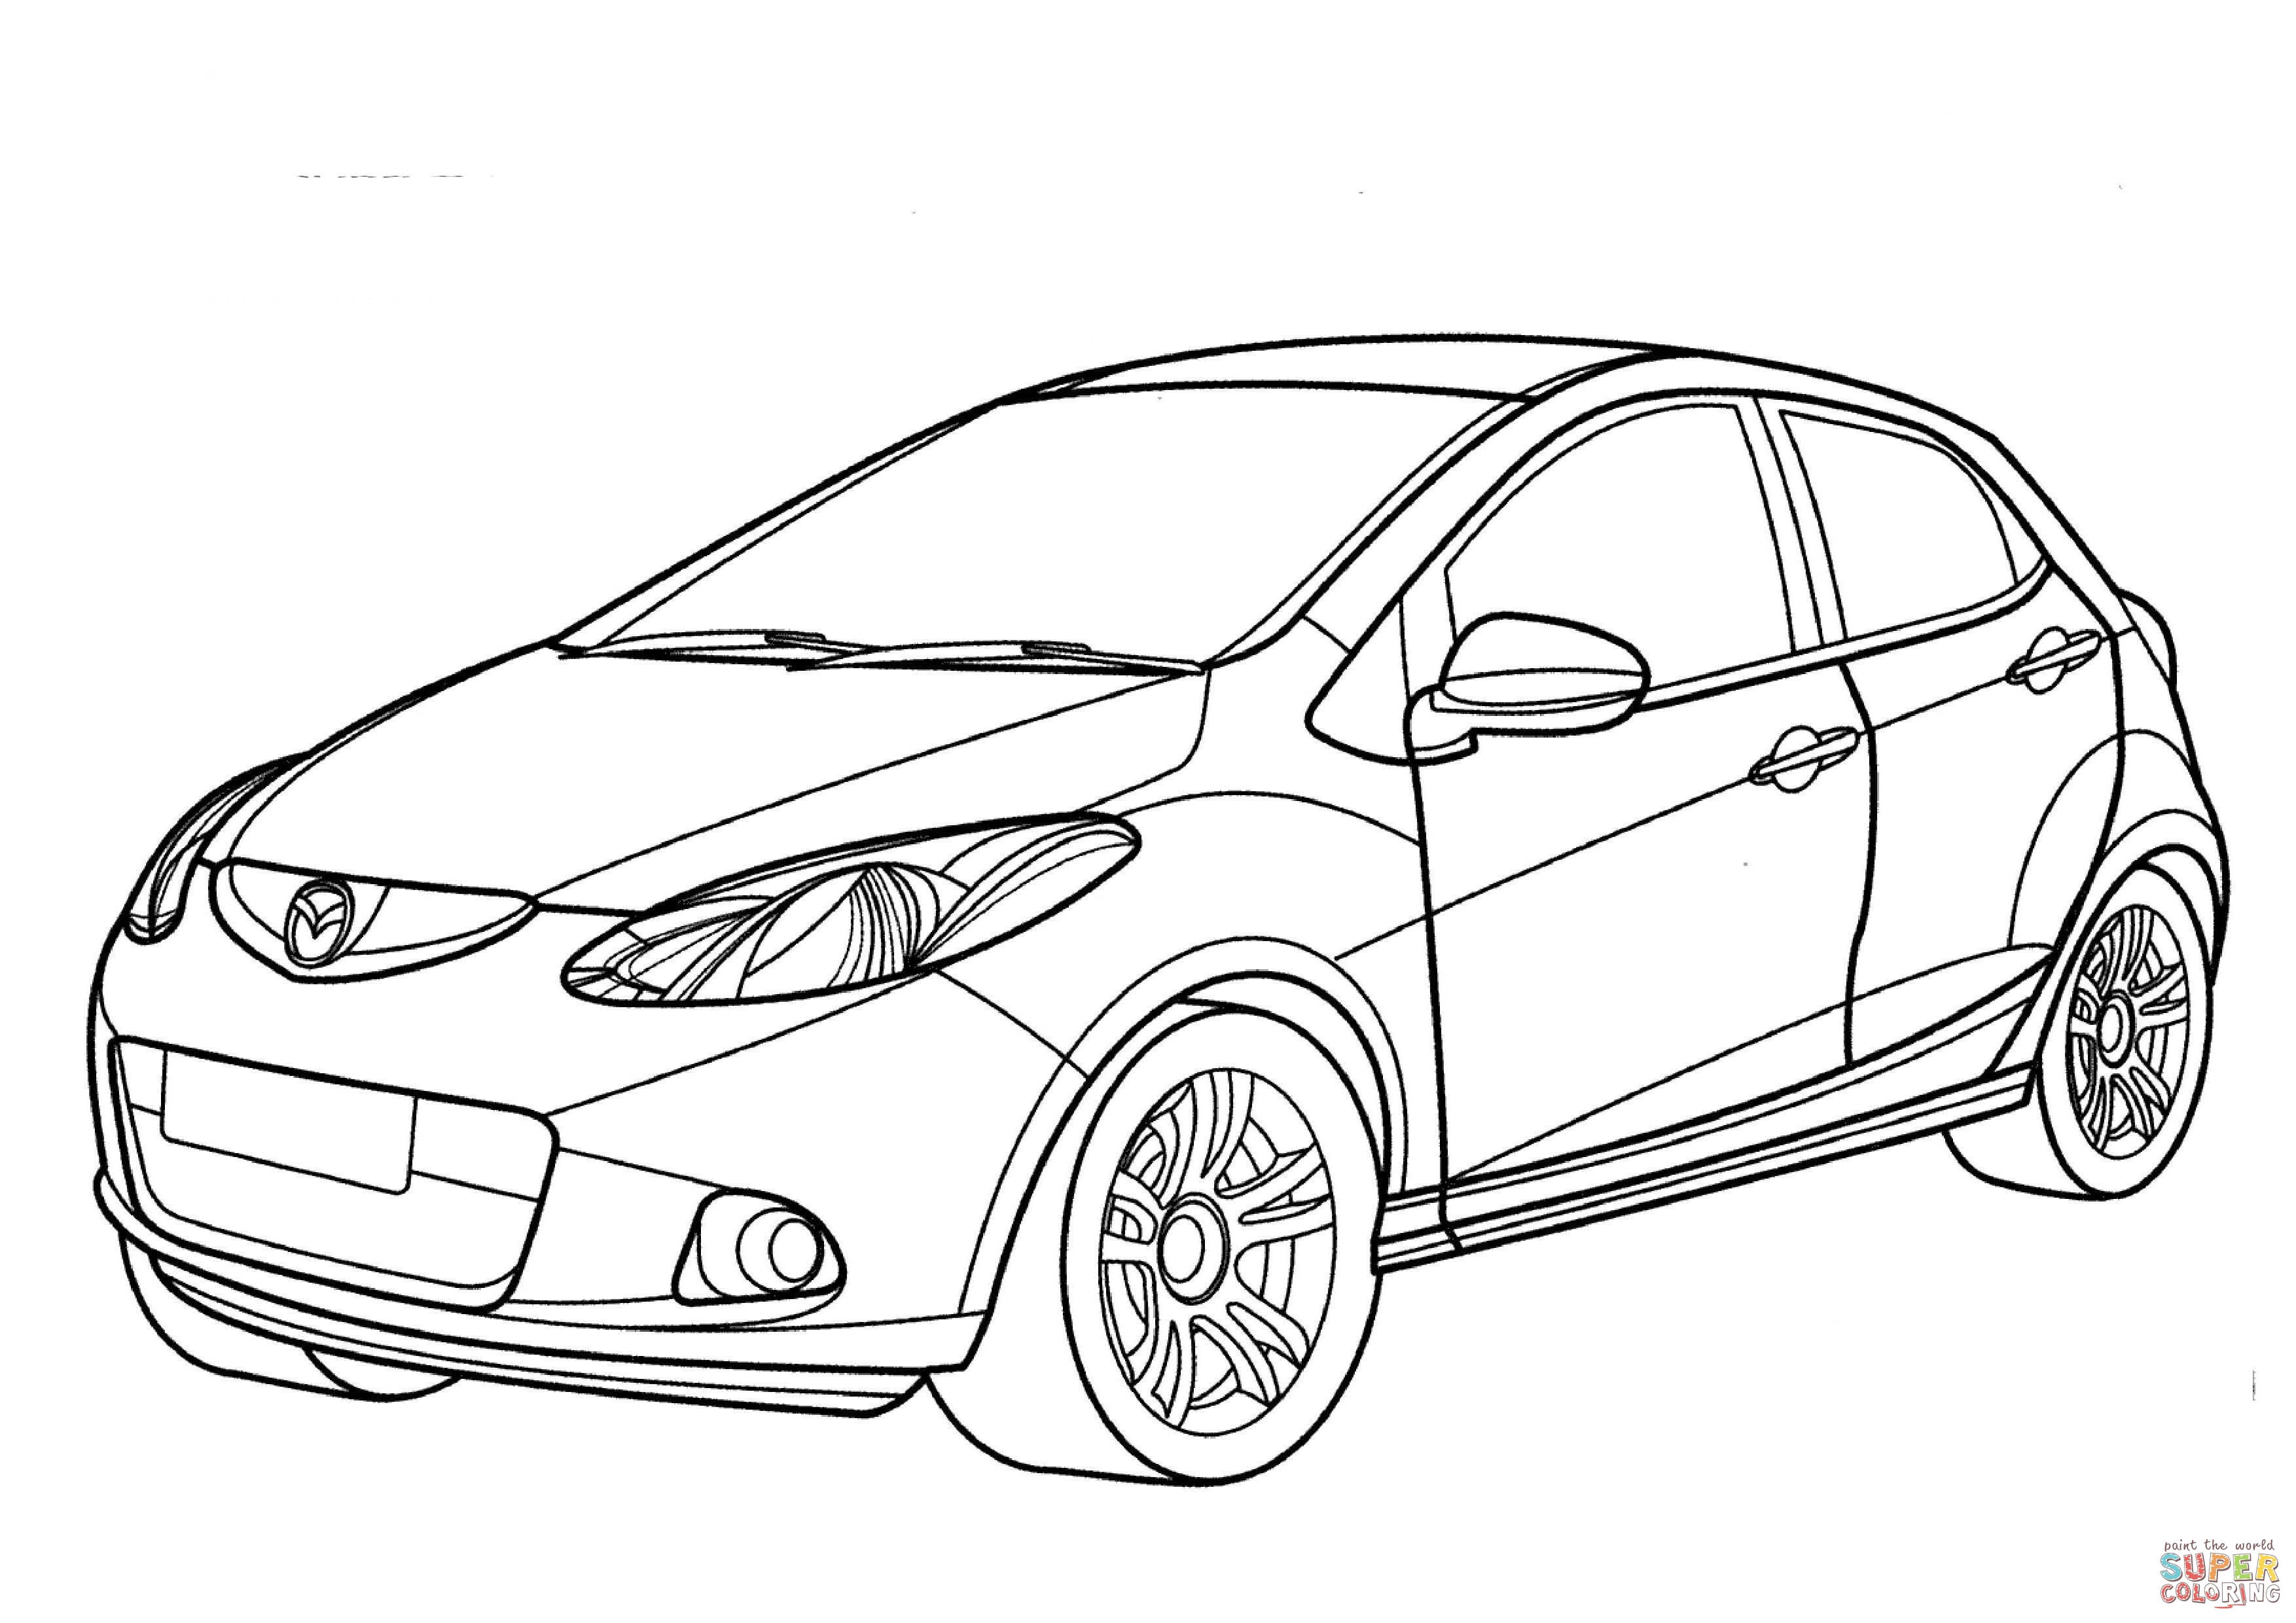 Mazda 2 coloring page | Free Printable Coloring Pages